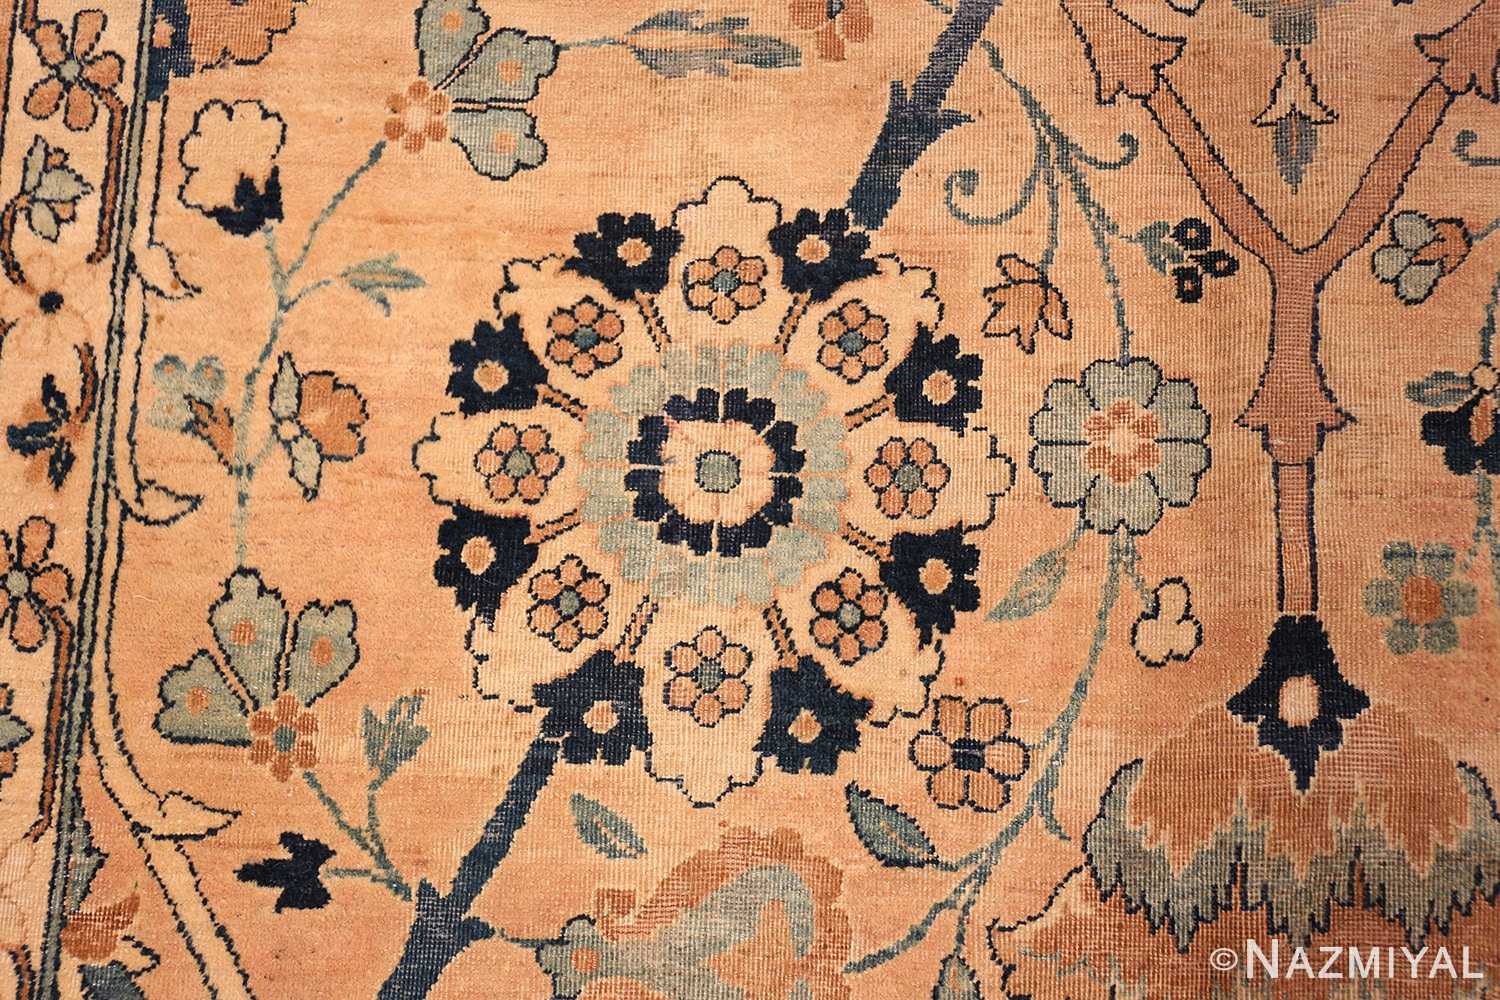 A detailed picture of center flower of the large vase design antique persian kerman rug #50701 from Nazmiyal Antique Rugs NYC